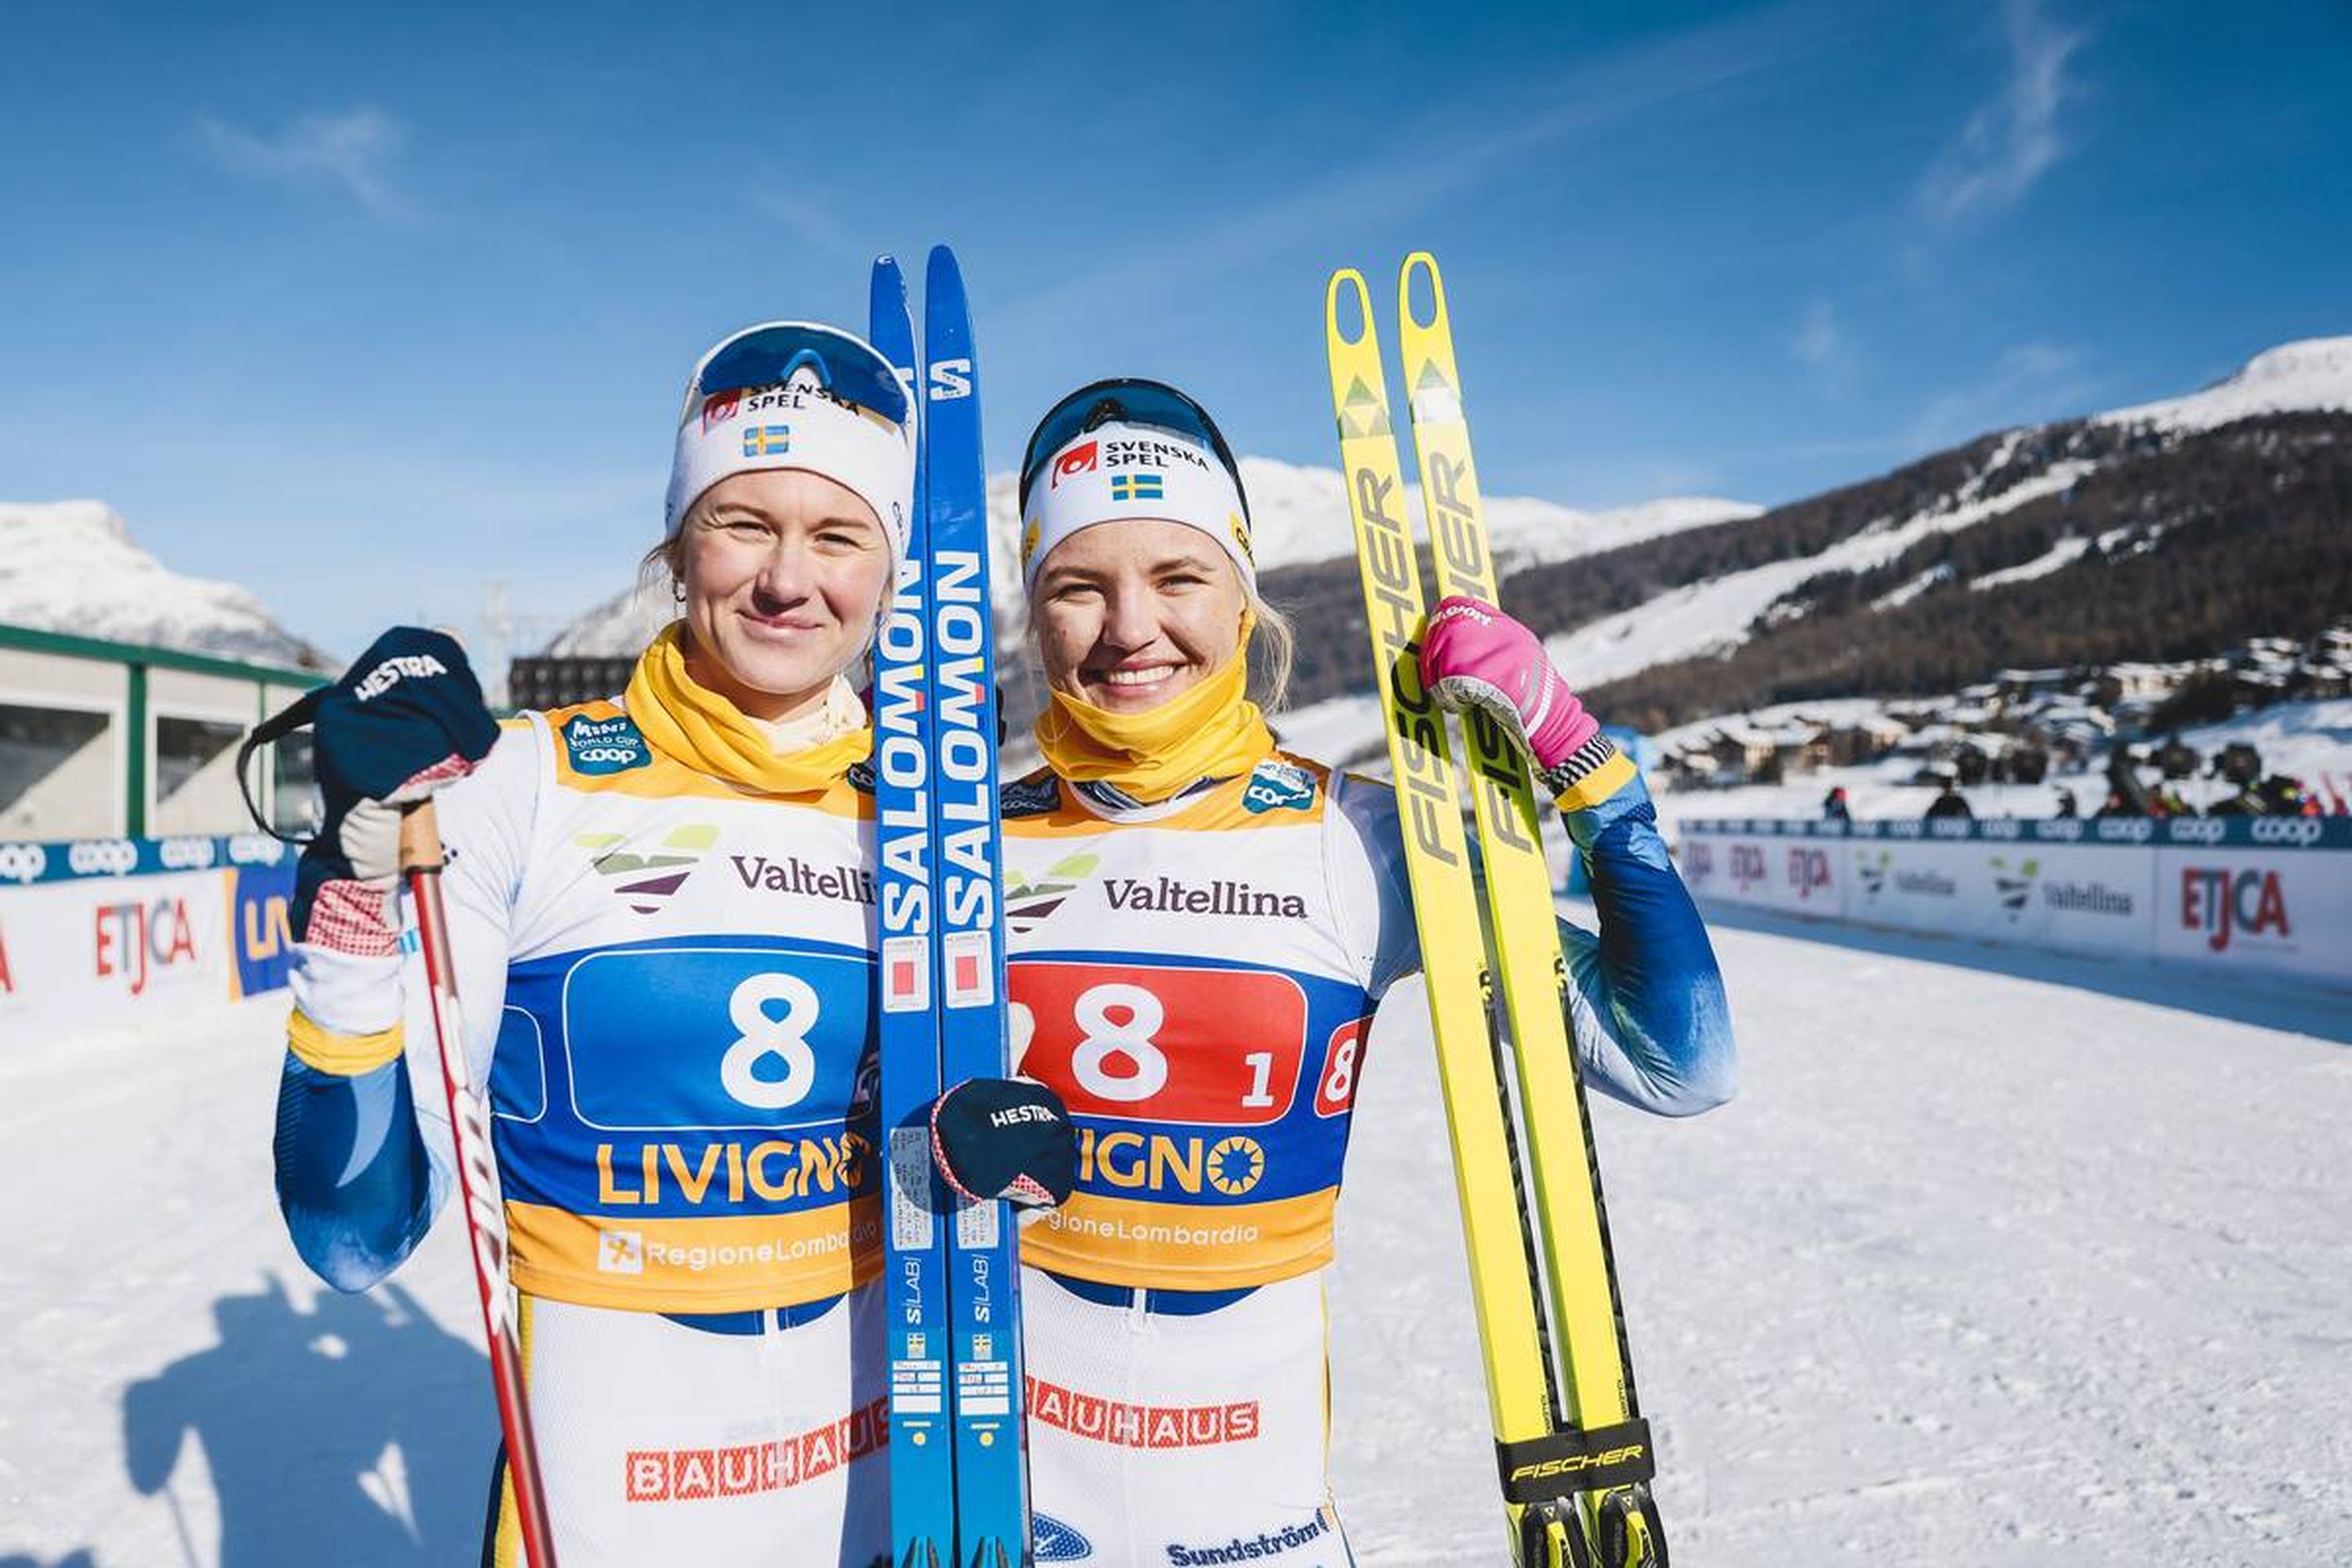 The plan worked out for Sweden's team sprint winners Maja Dahlqvist (left) and Linn Svahn (right): @Nordic Focus.